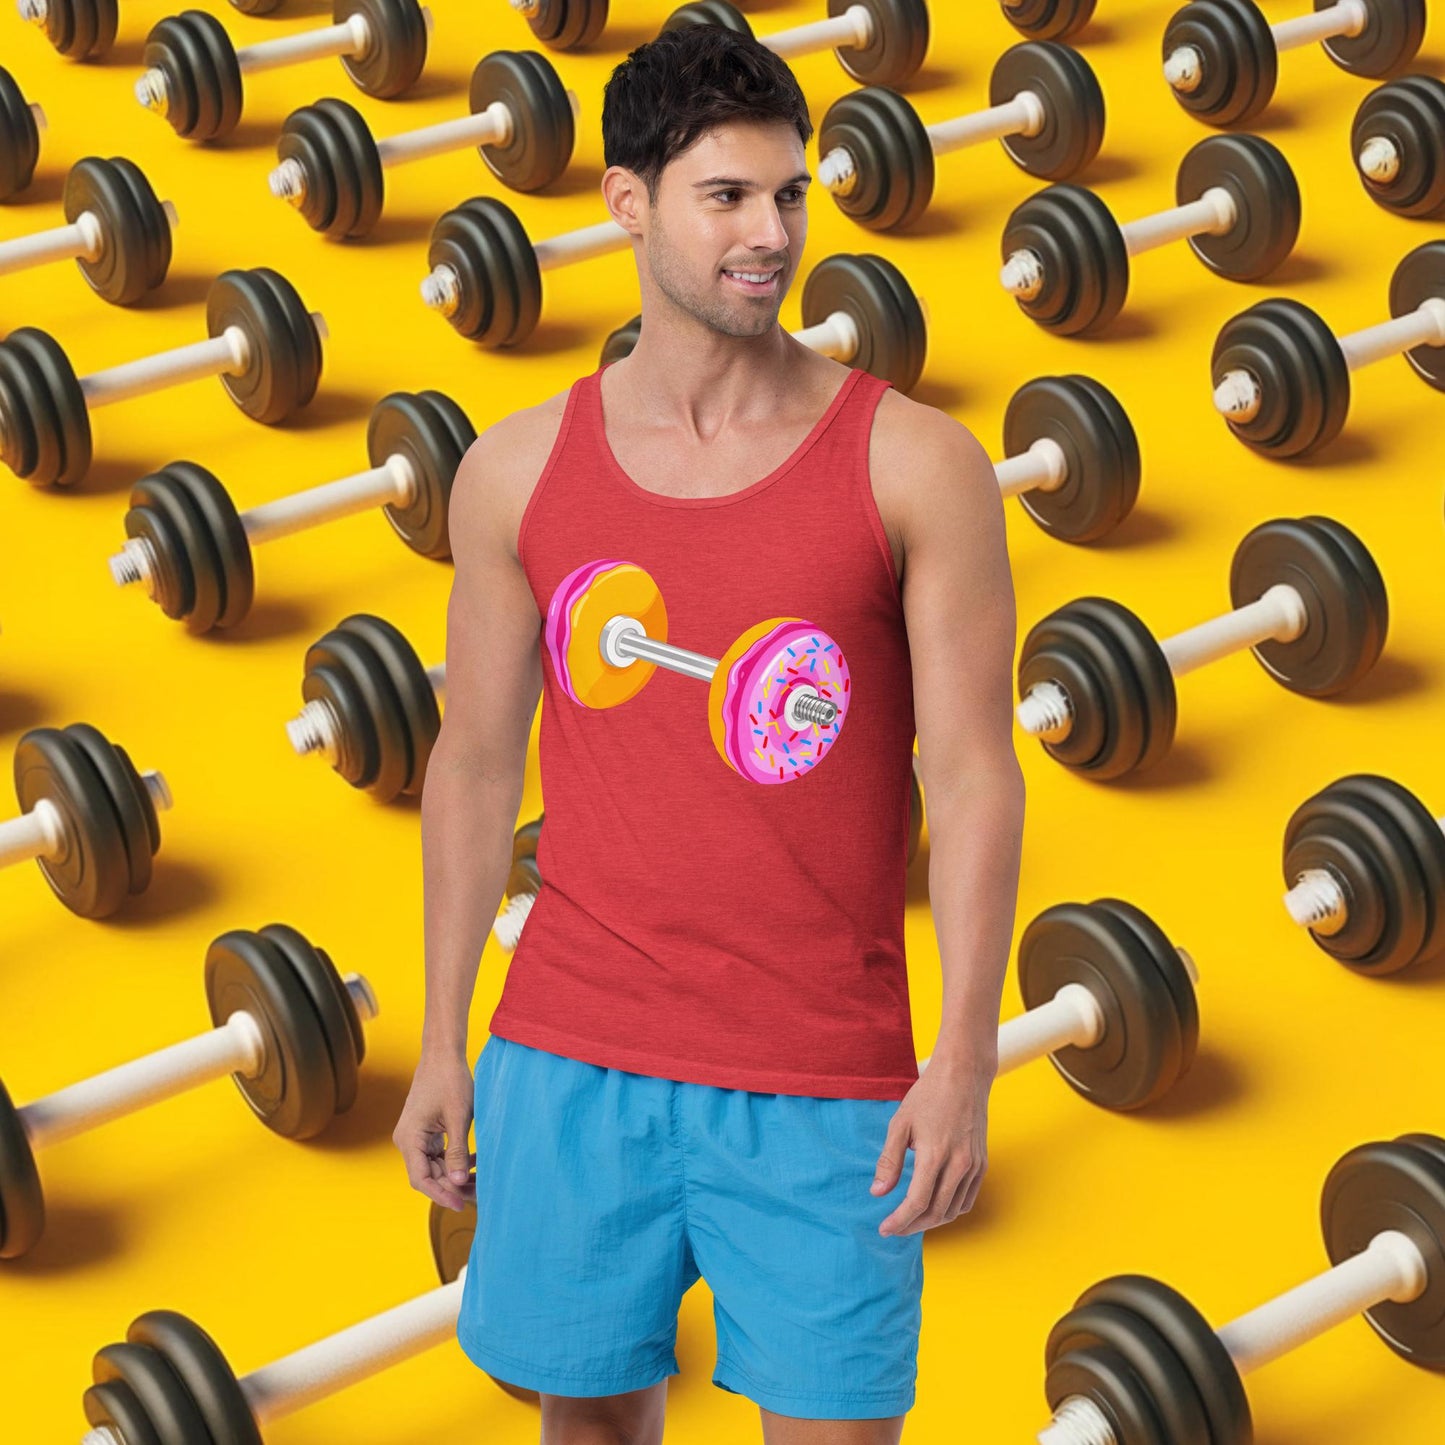 Donut Dumbbell Donuts Barbell Funny Bulk Diet Gym Workout Fitness Bodybuilding Tank Top Next Cult Brand